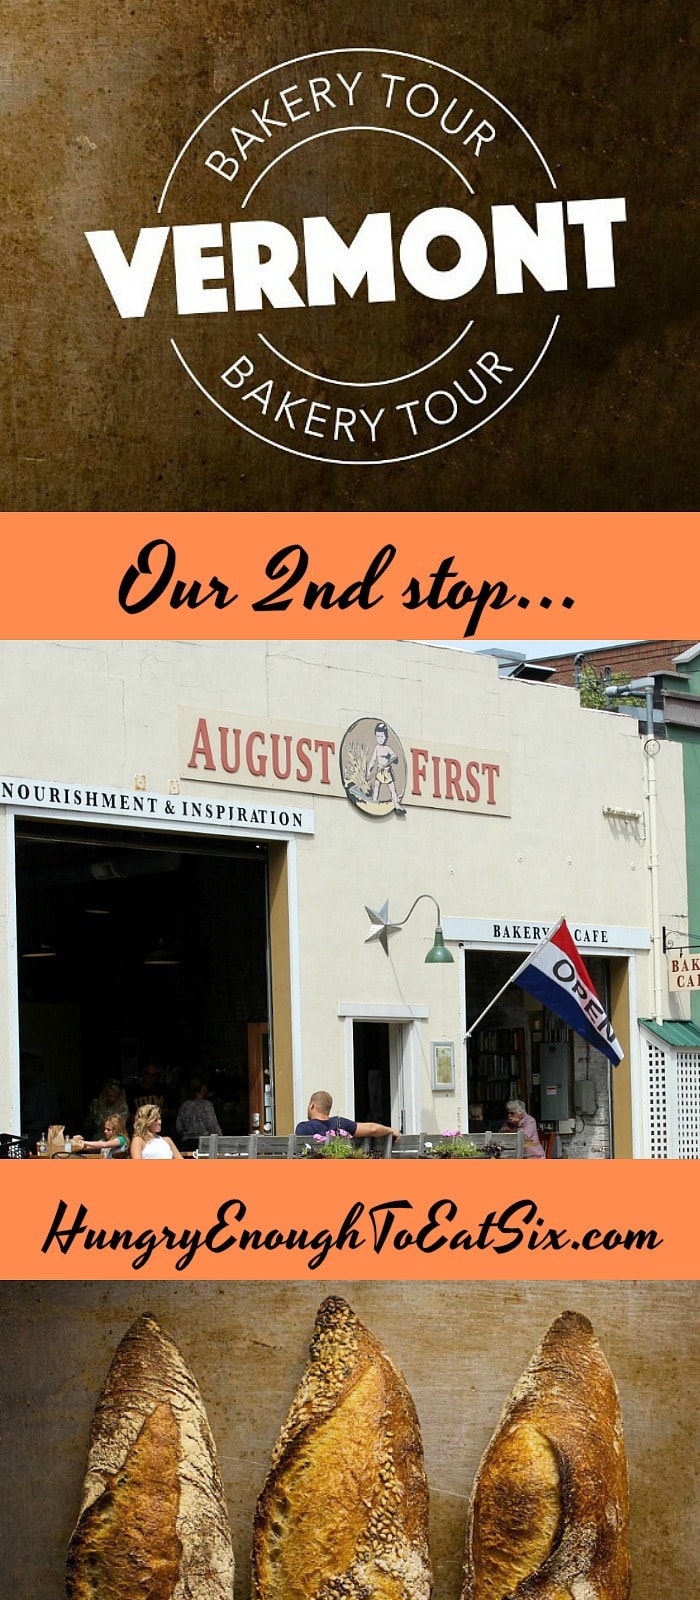 Delectable Destinations: August First Bakery: Our 2nd Stop on the Vermont Bakery Tour! Our second stop on the King Arthur Flour Vermont Bakery Tour: August First Bakery in downtown Burlington!